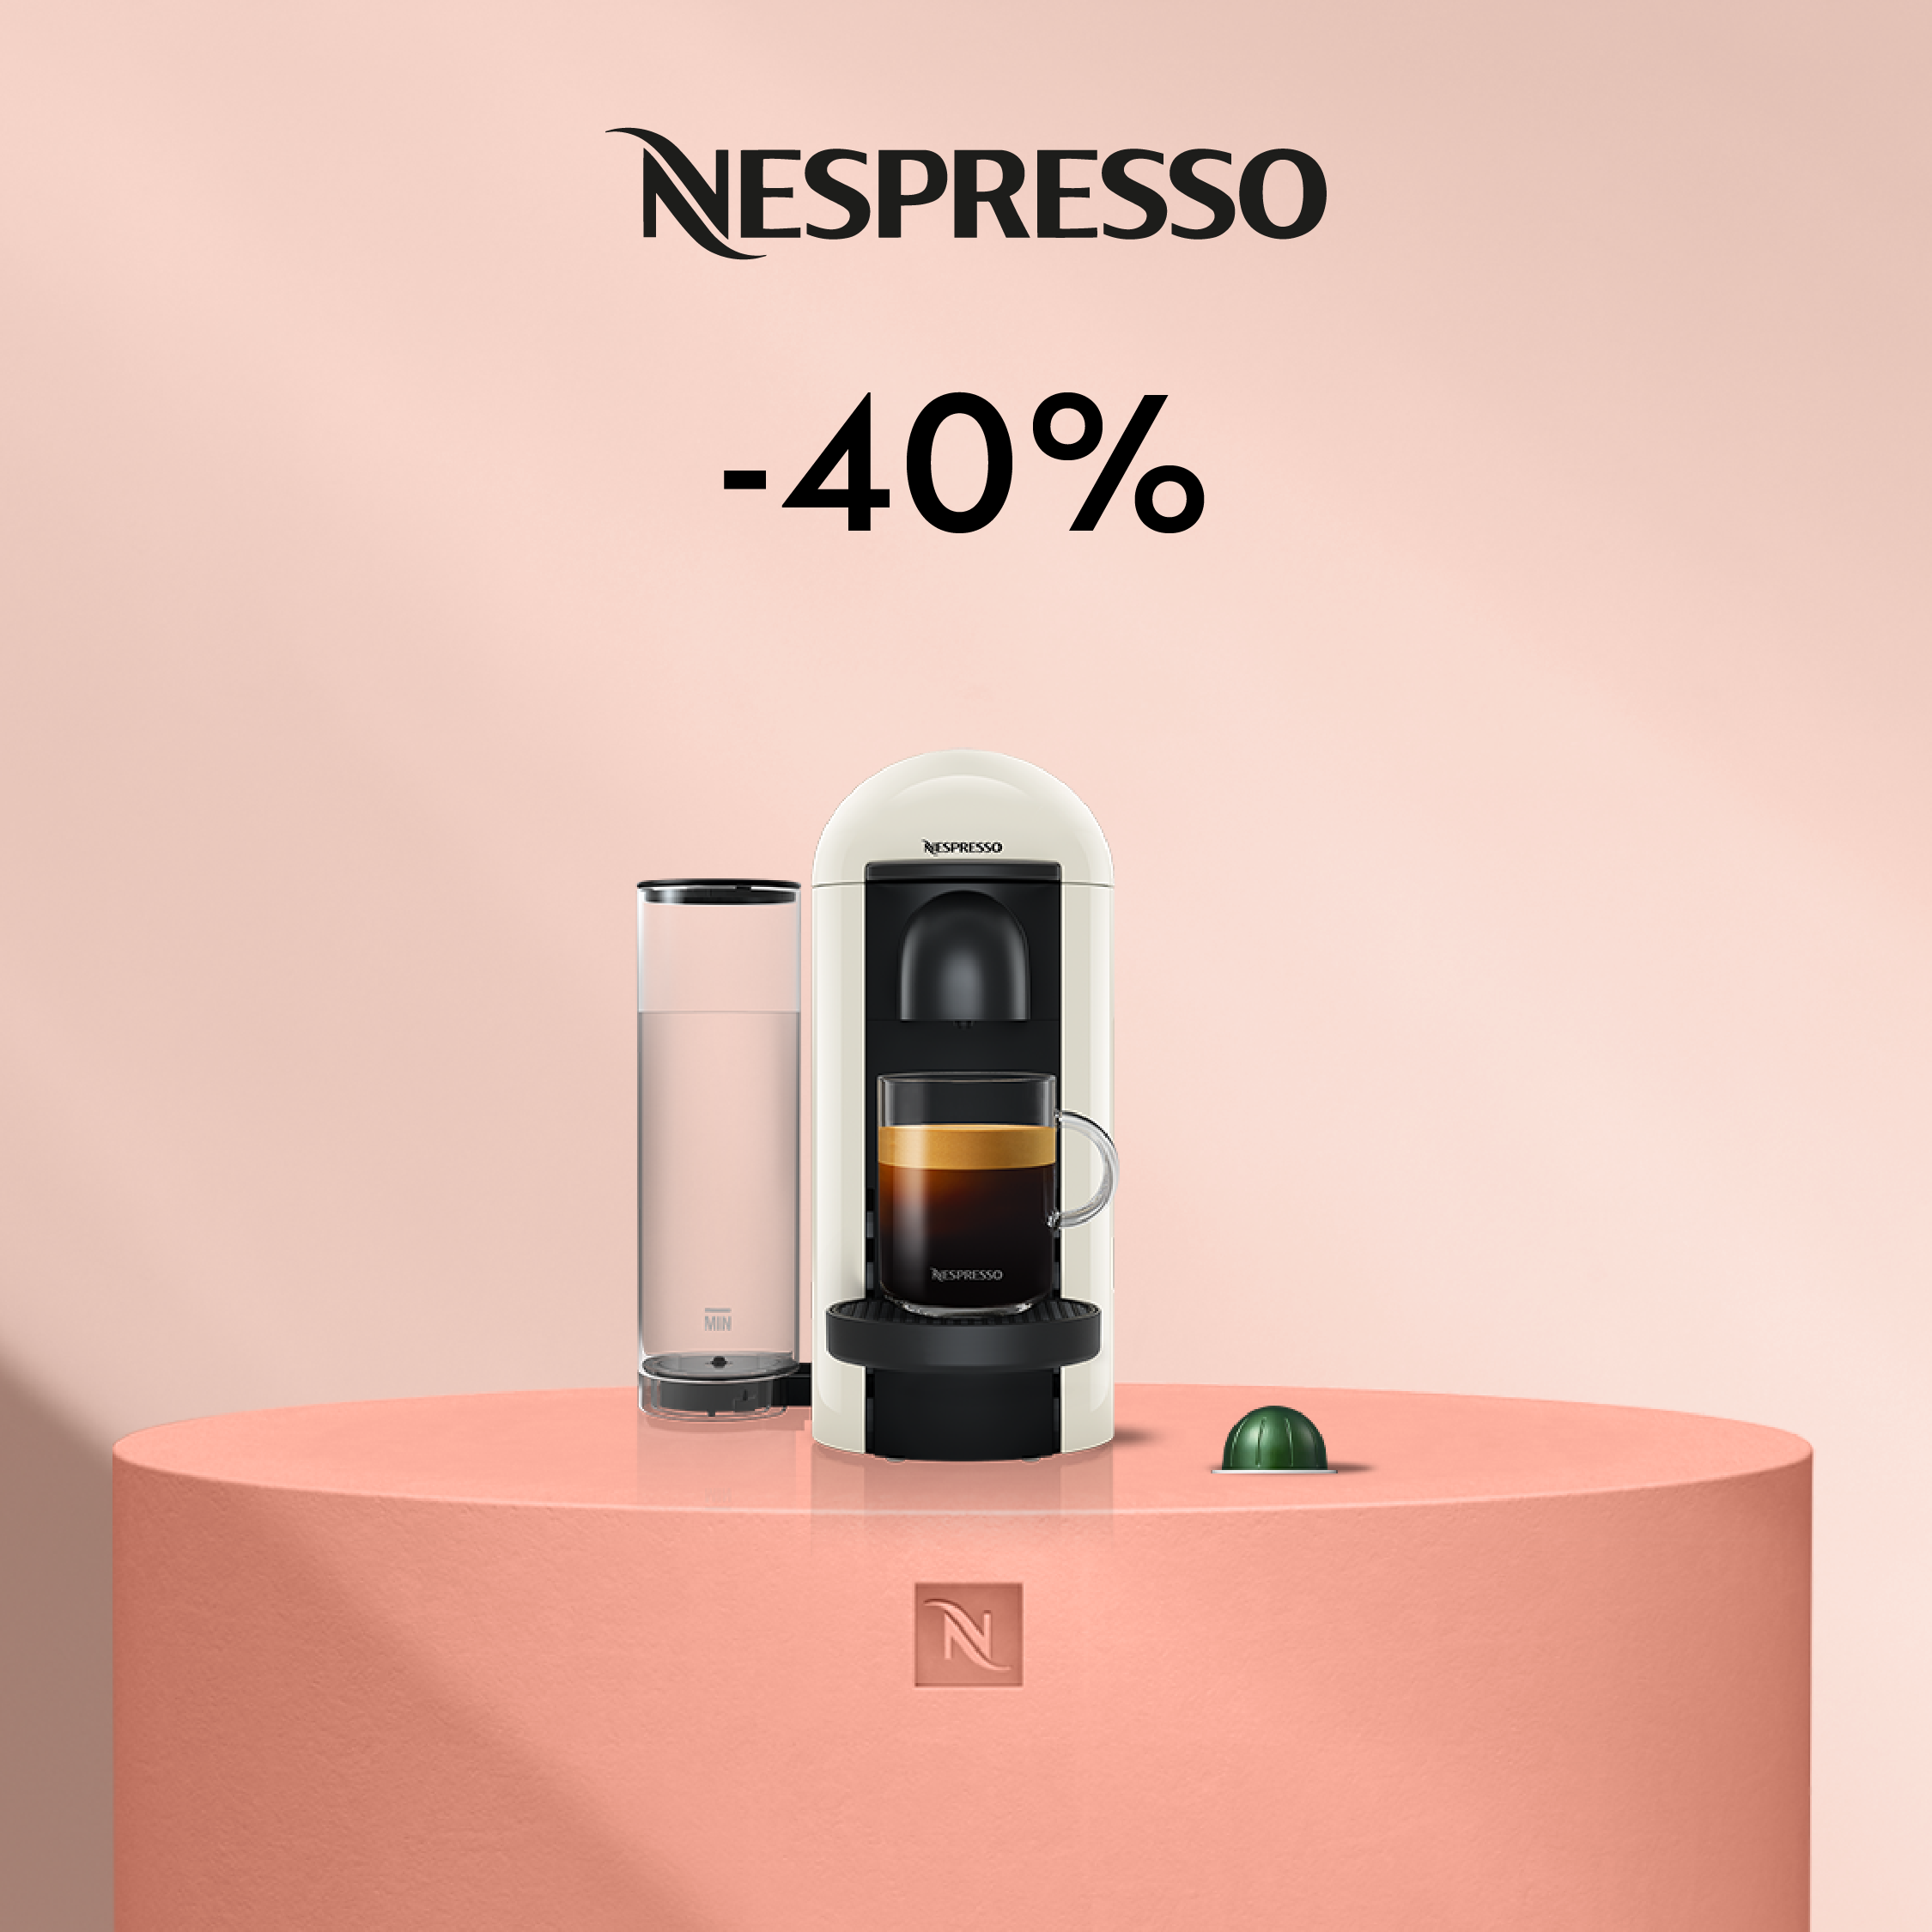 40% DISCOUNT ON THE VERTUO PLUS COFFEE MACHINE WHEN YOU BUY 80 CAPSULES!